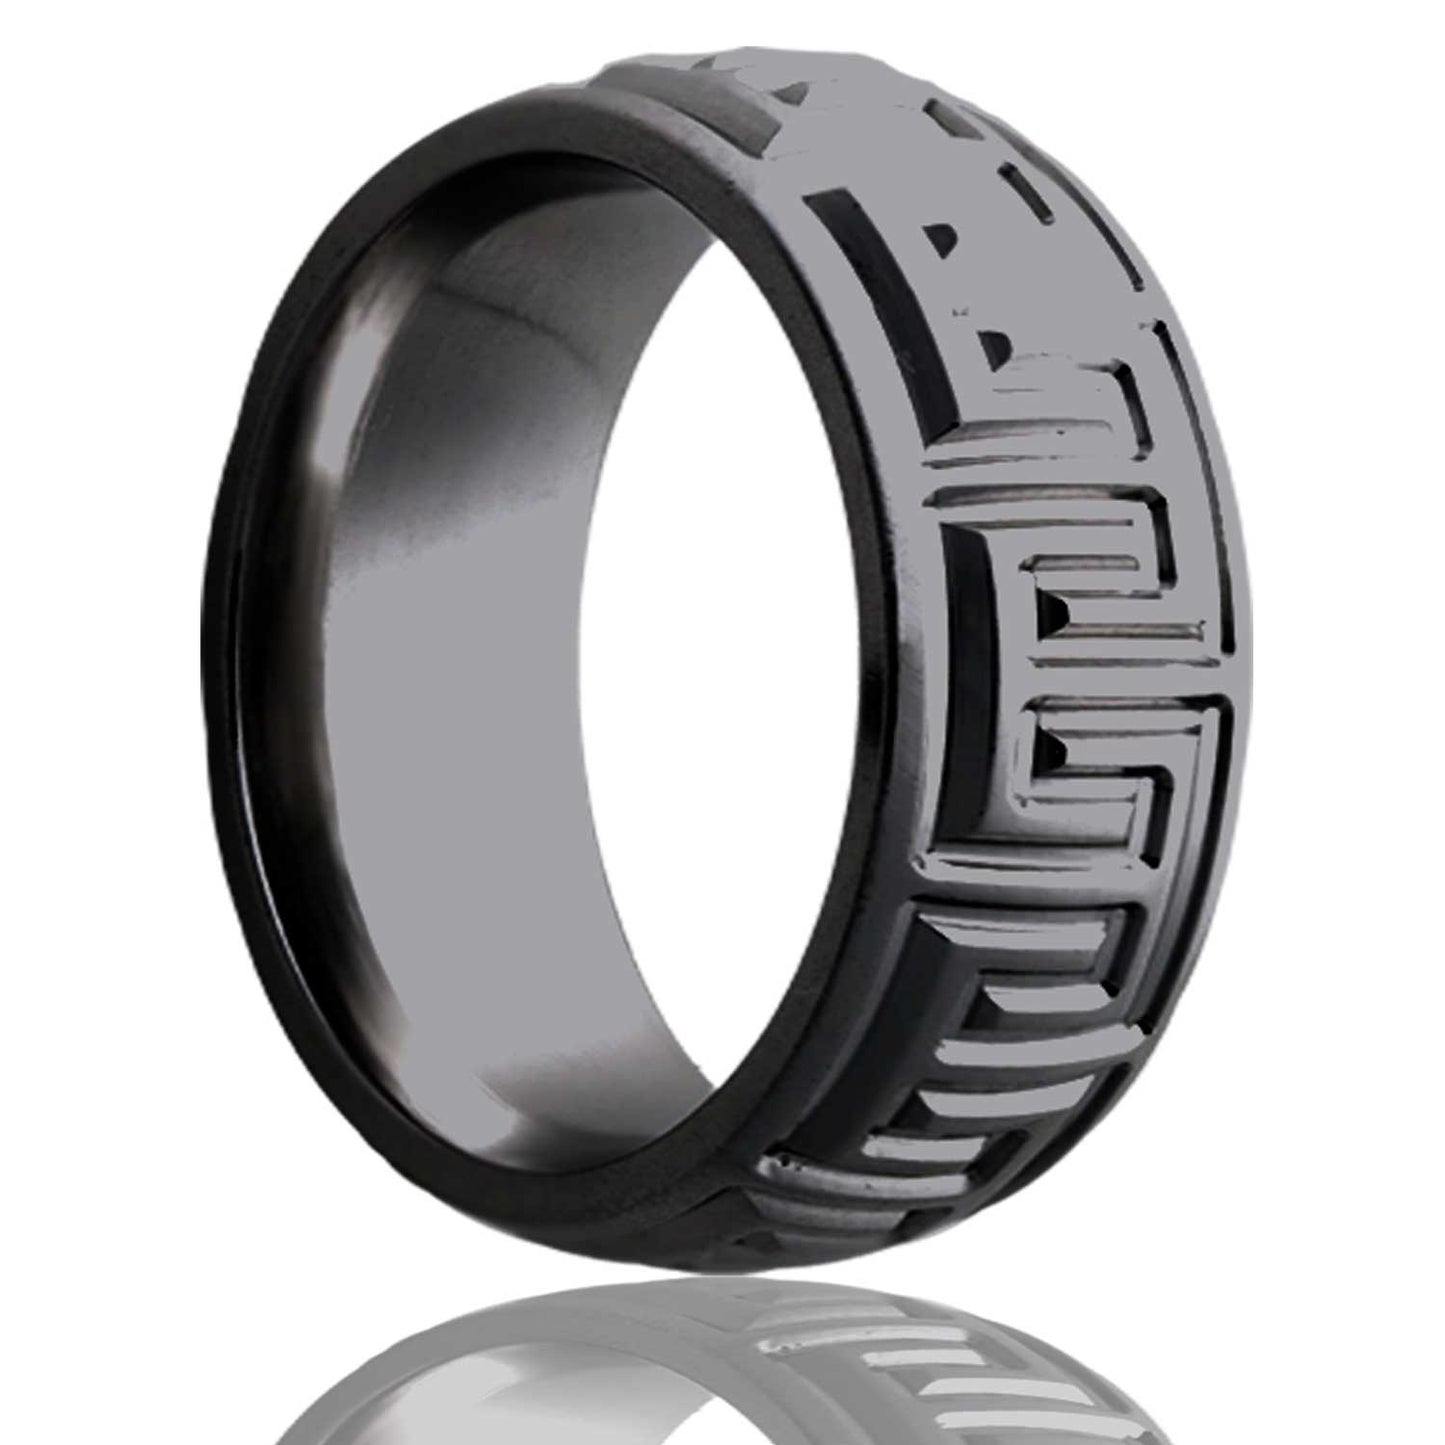 A greek key domed zirconium men's wedding band displayed on a neutral white background.